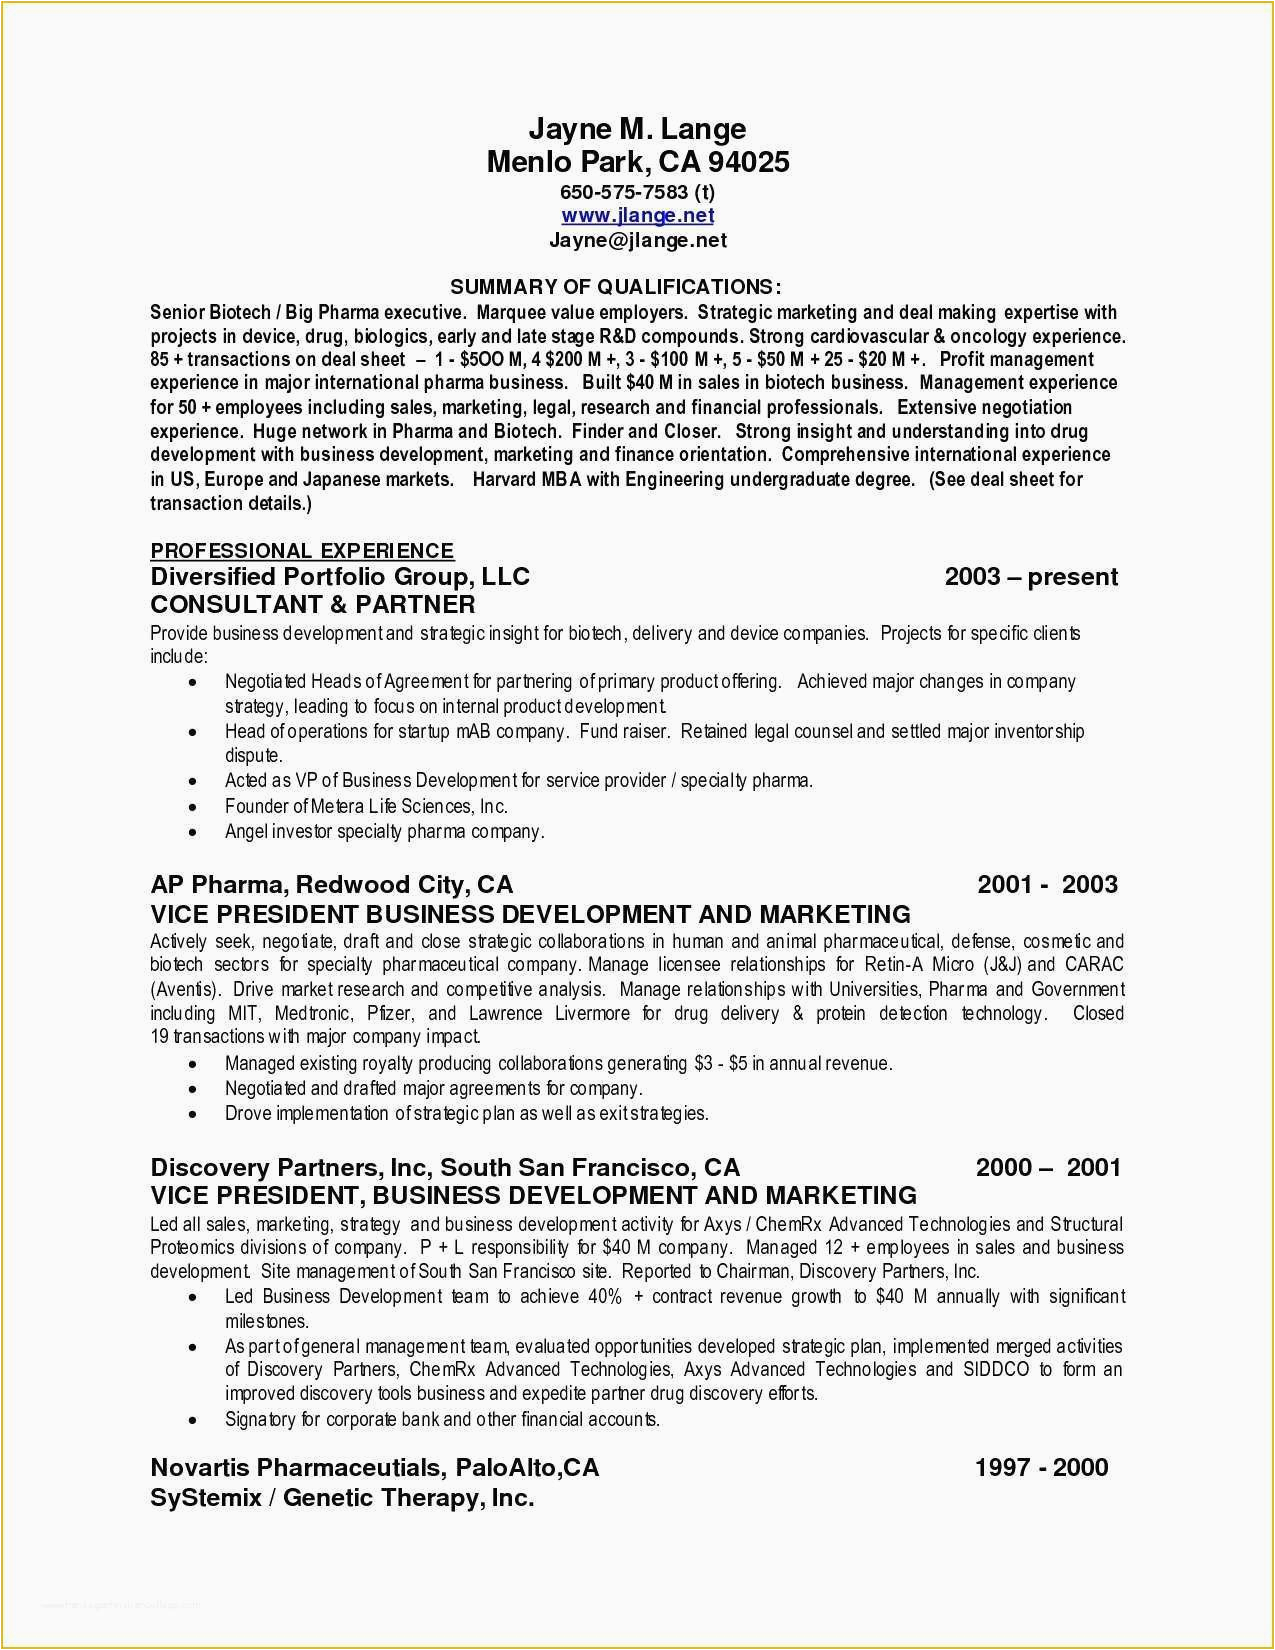 Sample Resume format for Oil and Gas Industry Free Oil and Gas Resume Templates Oil and Gas Resume Writers